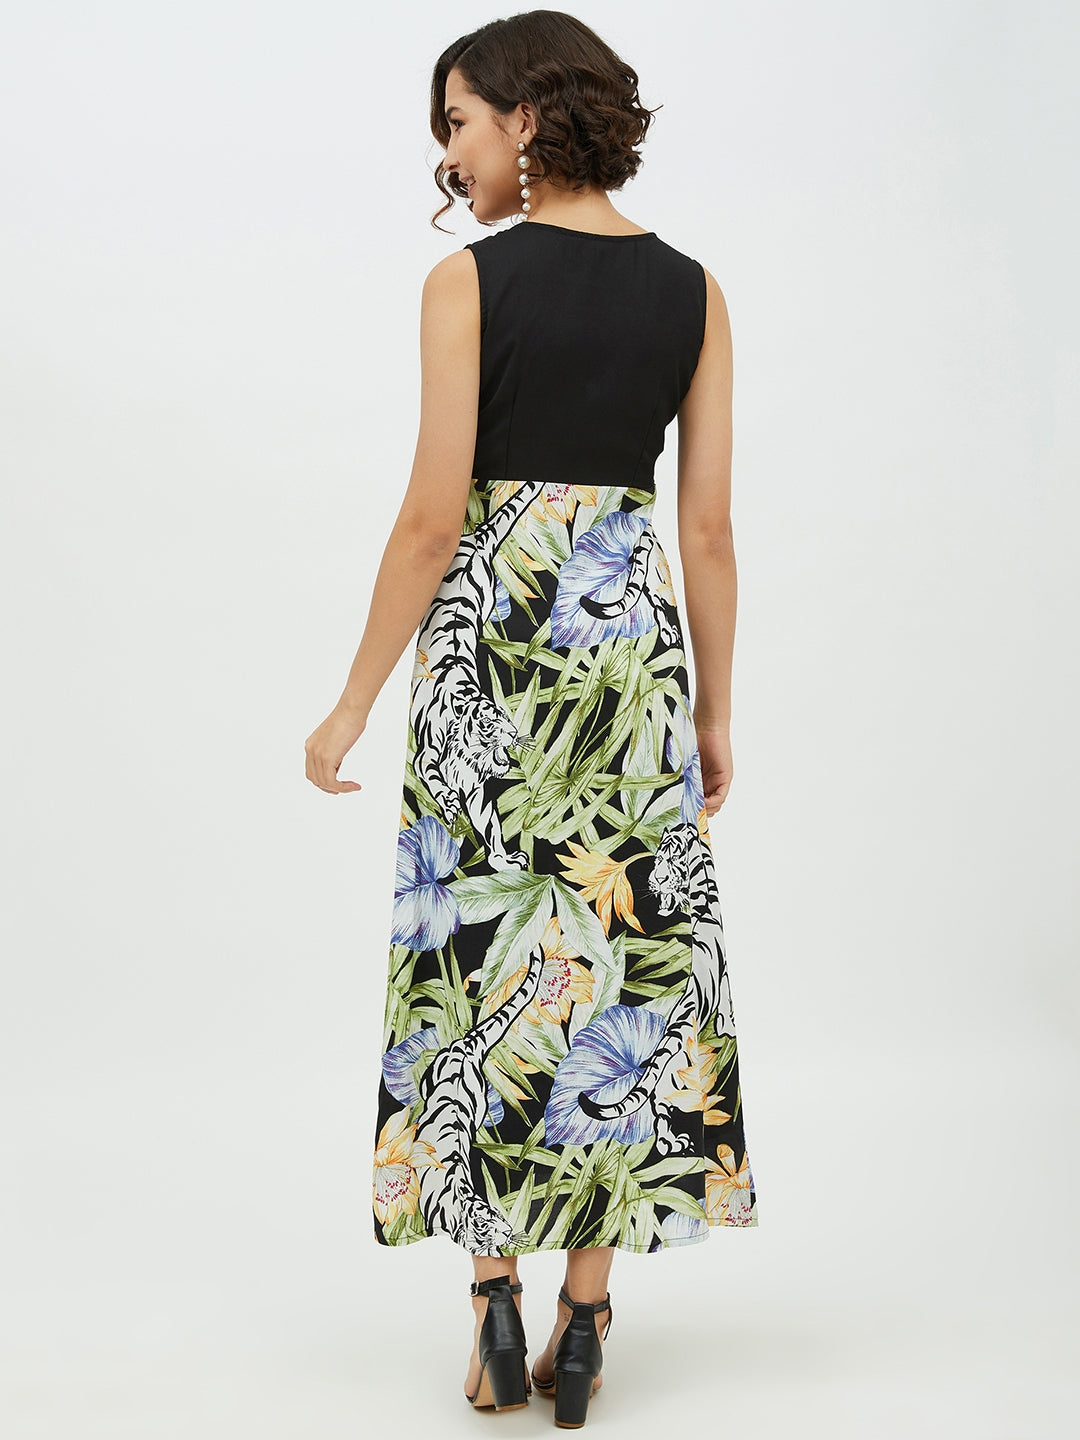 Women's Polyester Rayon Floral Printed Long Dress